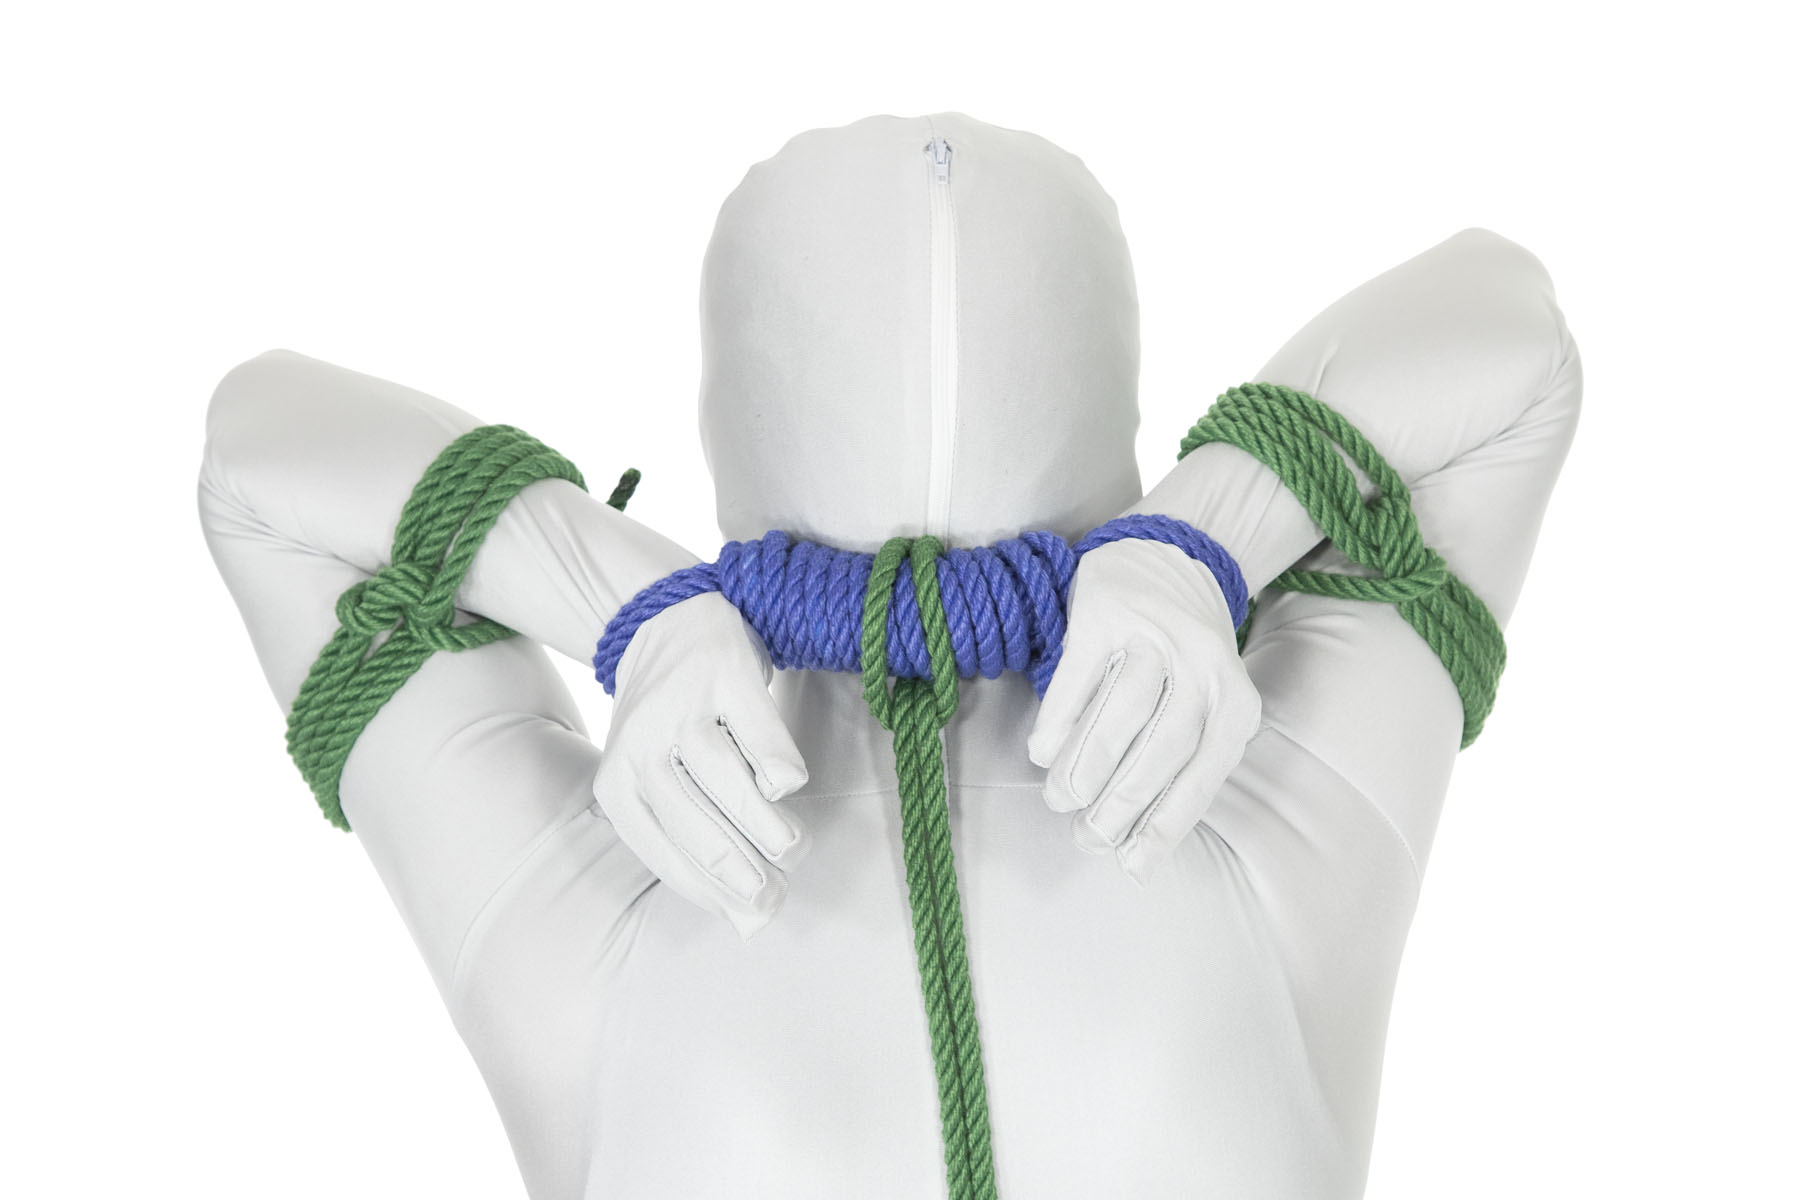 A closeup rear view of a person with their hands tied behind their back by a blue bar tie. A green rope has been attached to the bar tie with a larks head and goes down the body and out of frame. A frapped single column tie has been tied around each arm, binding the upper and lower arms together.